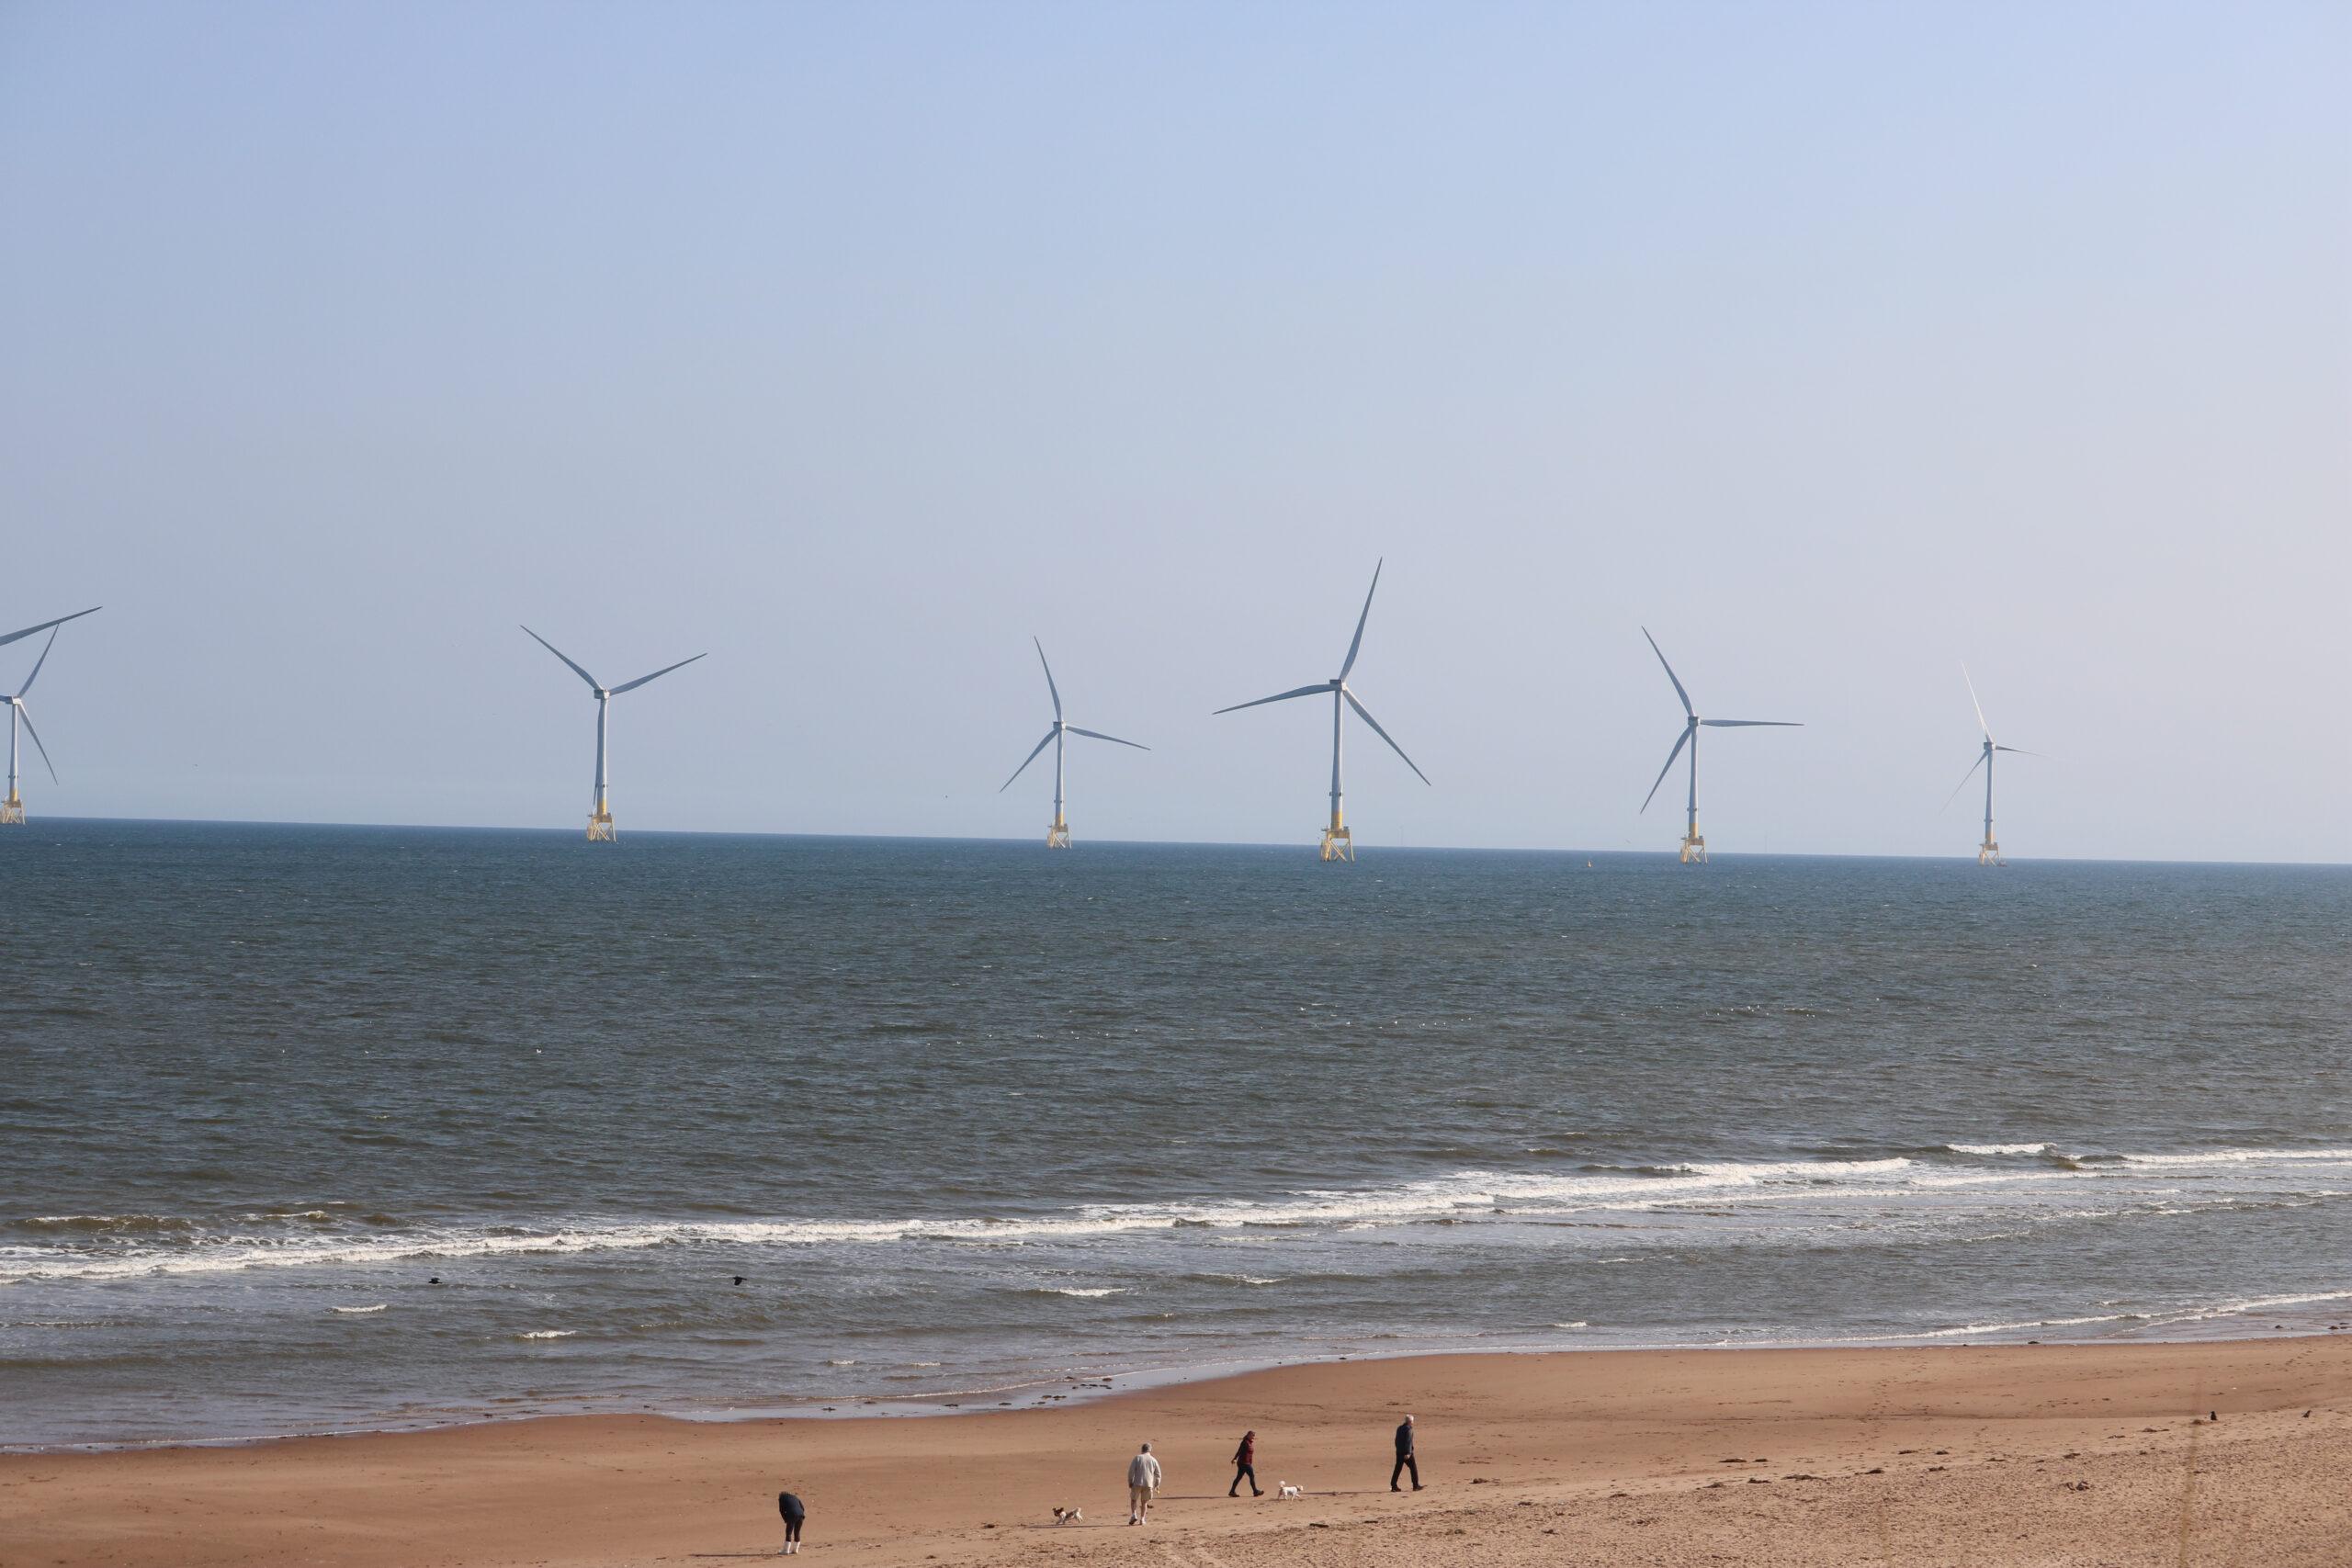 Offshore wind turbines seen from the beach